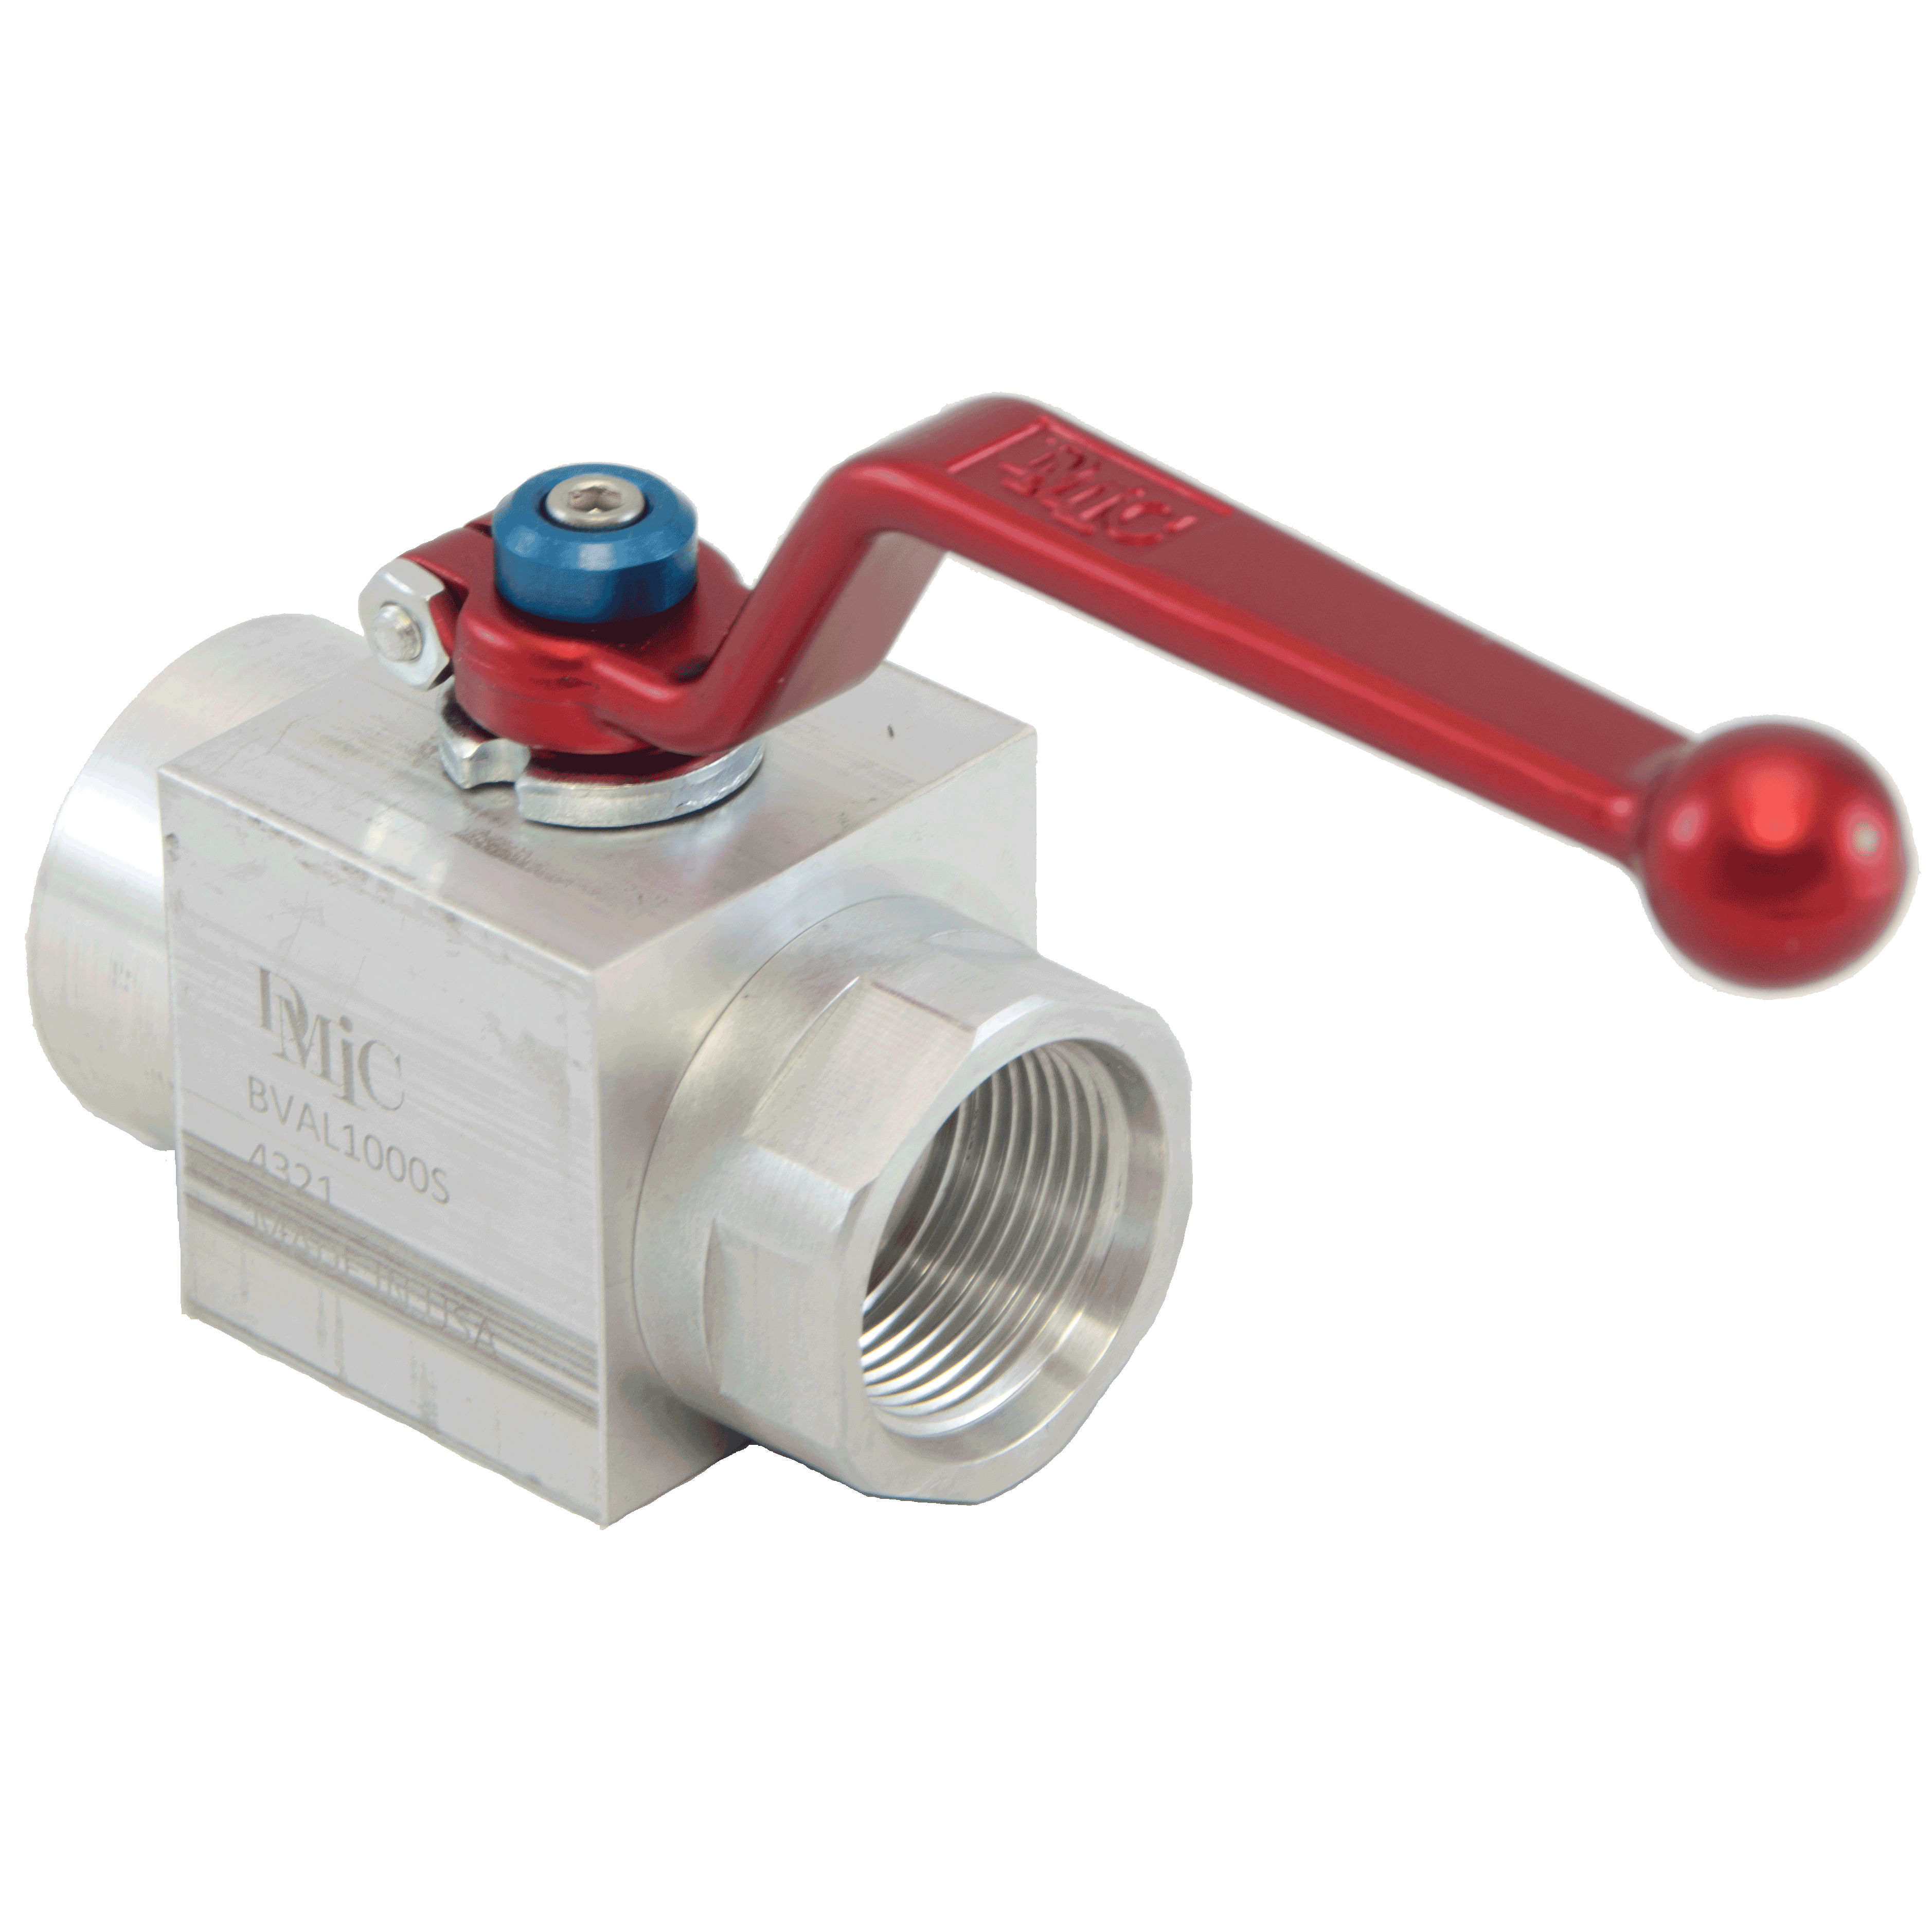 BVAL-3000N-4321 : DMIC Suction Ball Valve, 3 NPT, Aluminum, 400psi, Two-Way